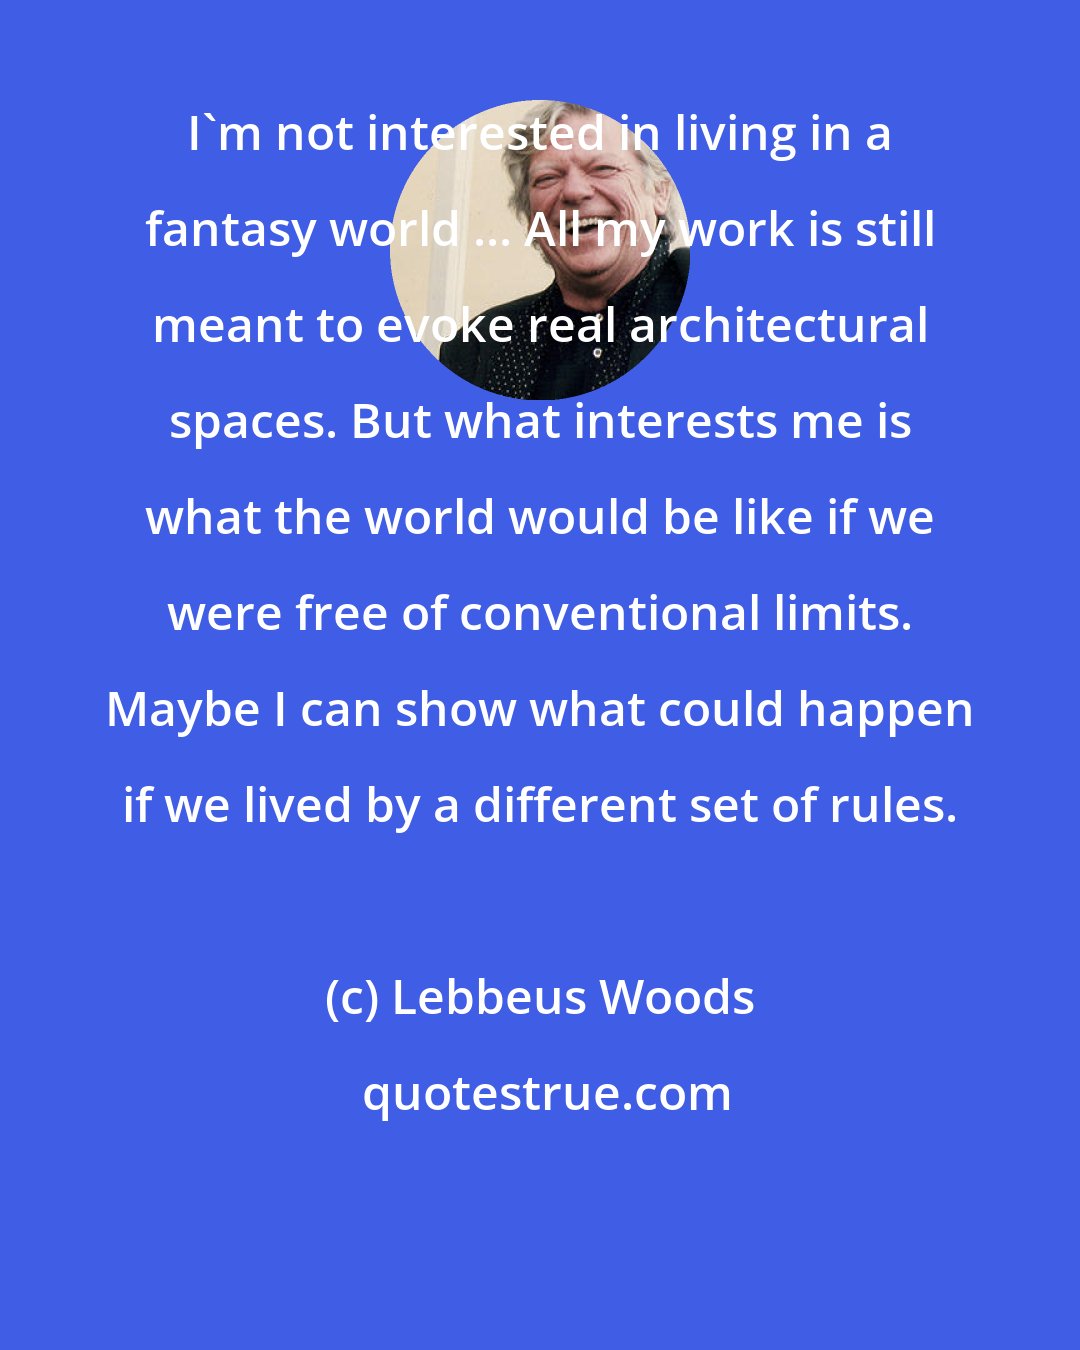 Lebbeus Woods: I'm not interested in living in a fantasy world ... All my work is still meant to evoke real architectural spaces. But what interests me is what the world would be like if we were free of conventional limits. Maybe I can show what could happen if we lived by a different set of rules.